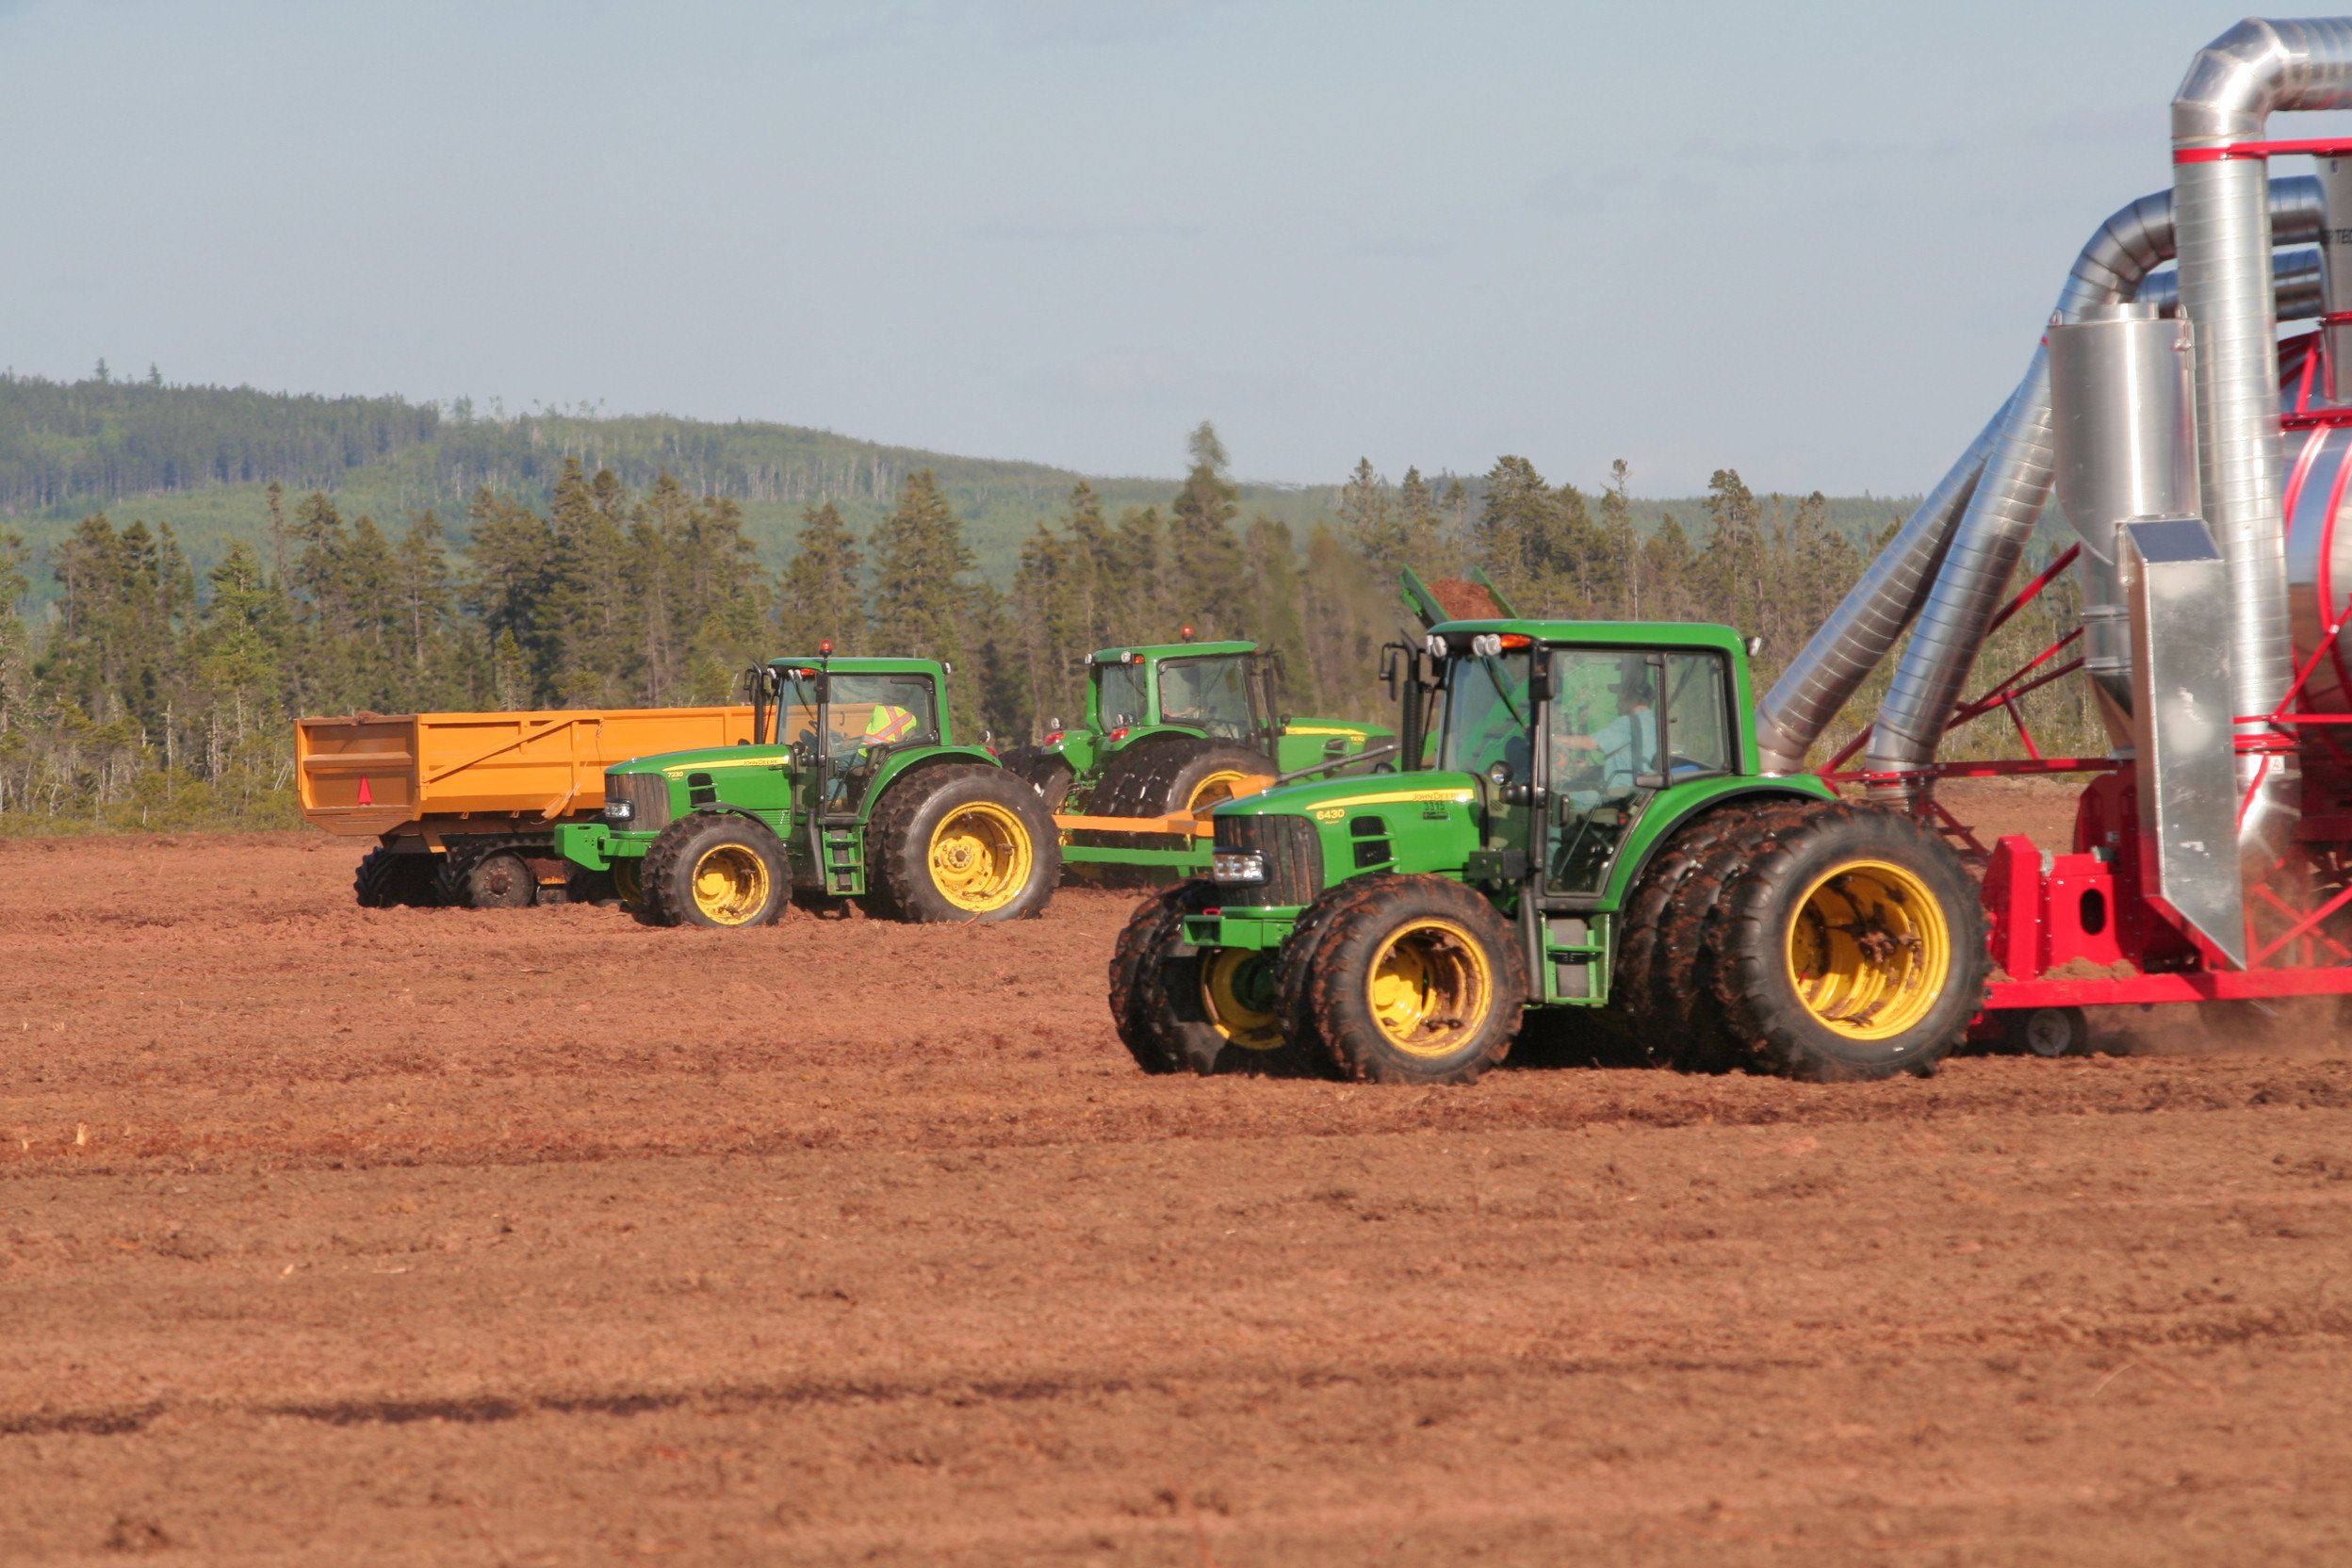 Machines collecting peat moss